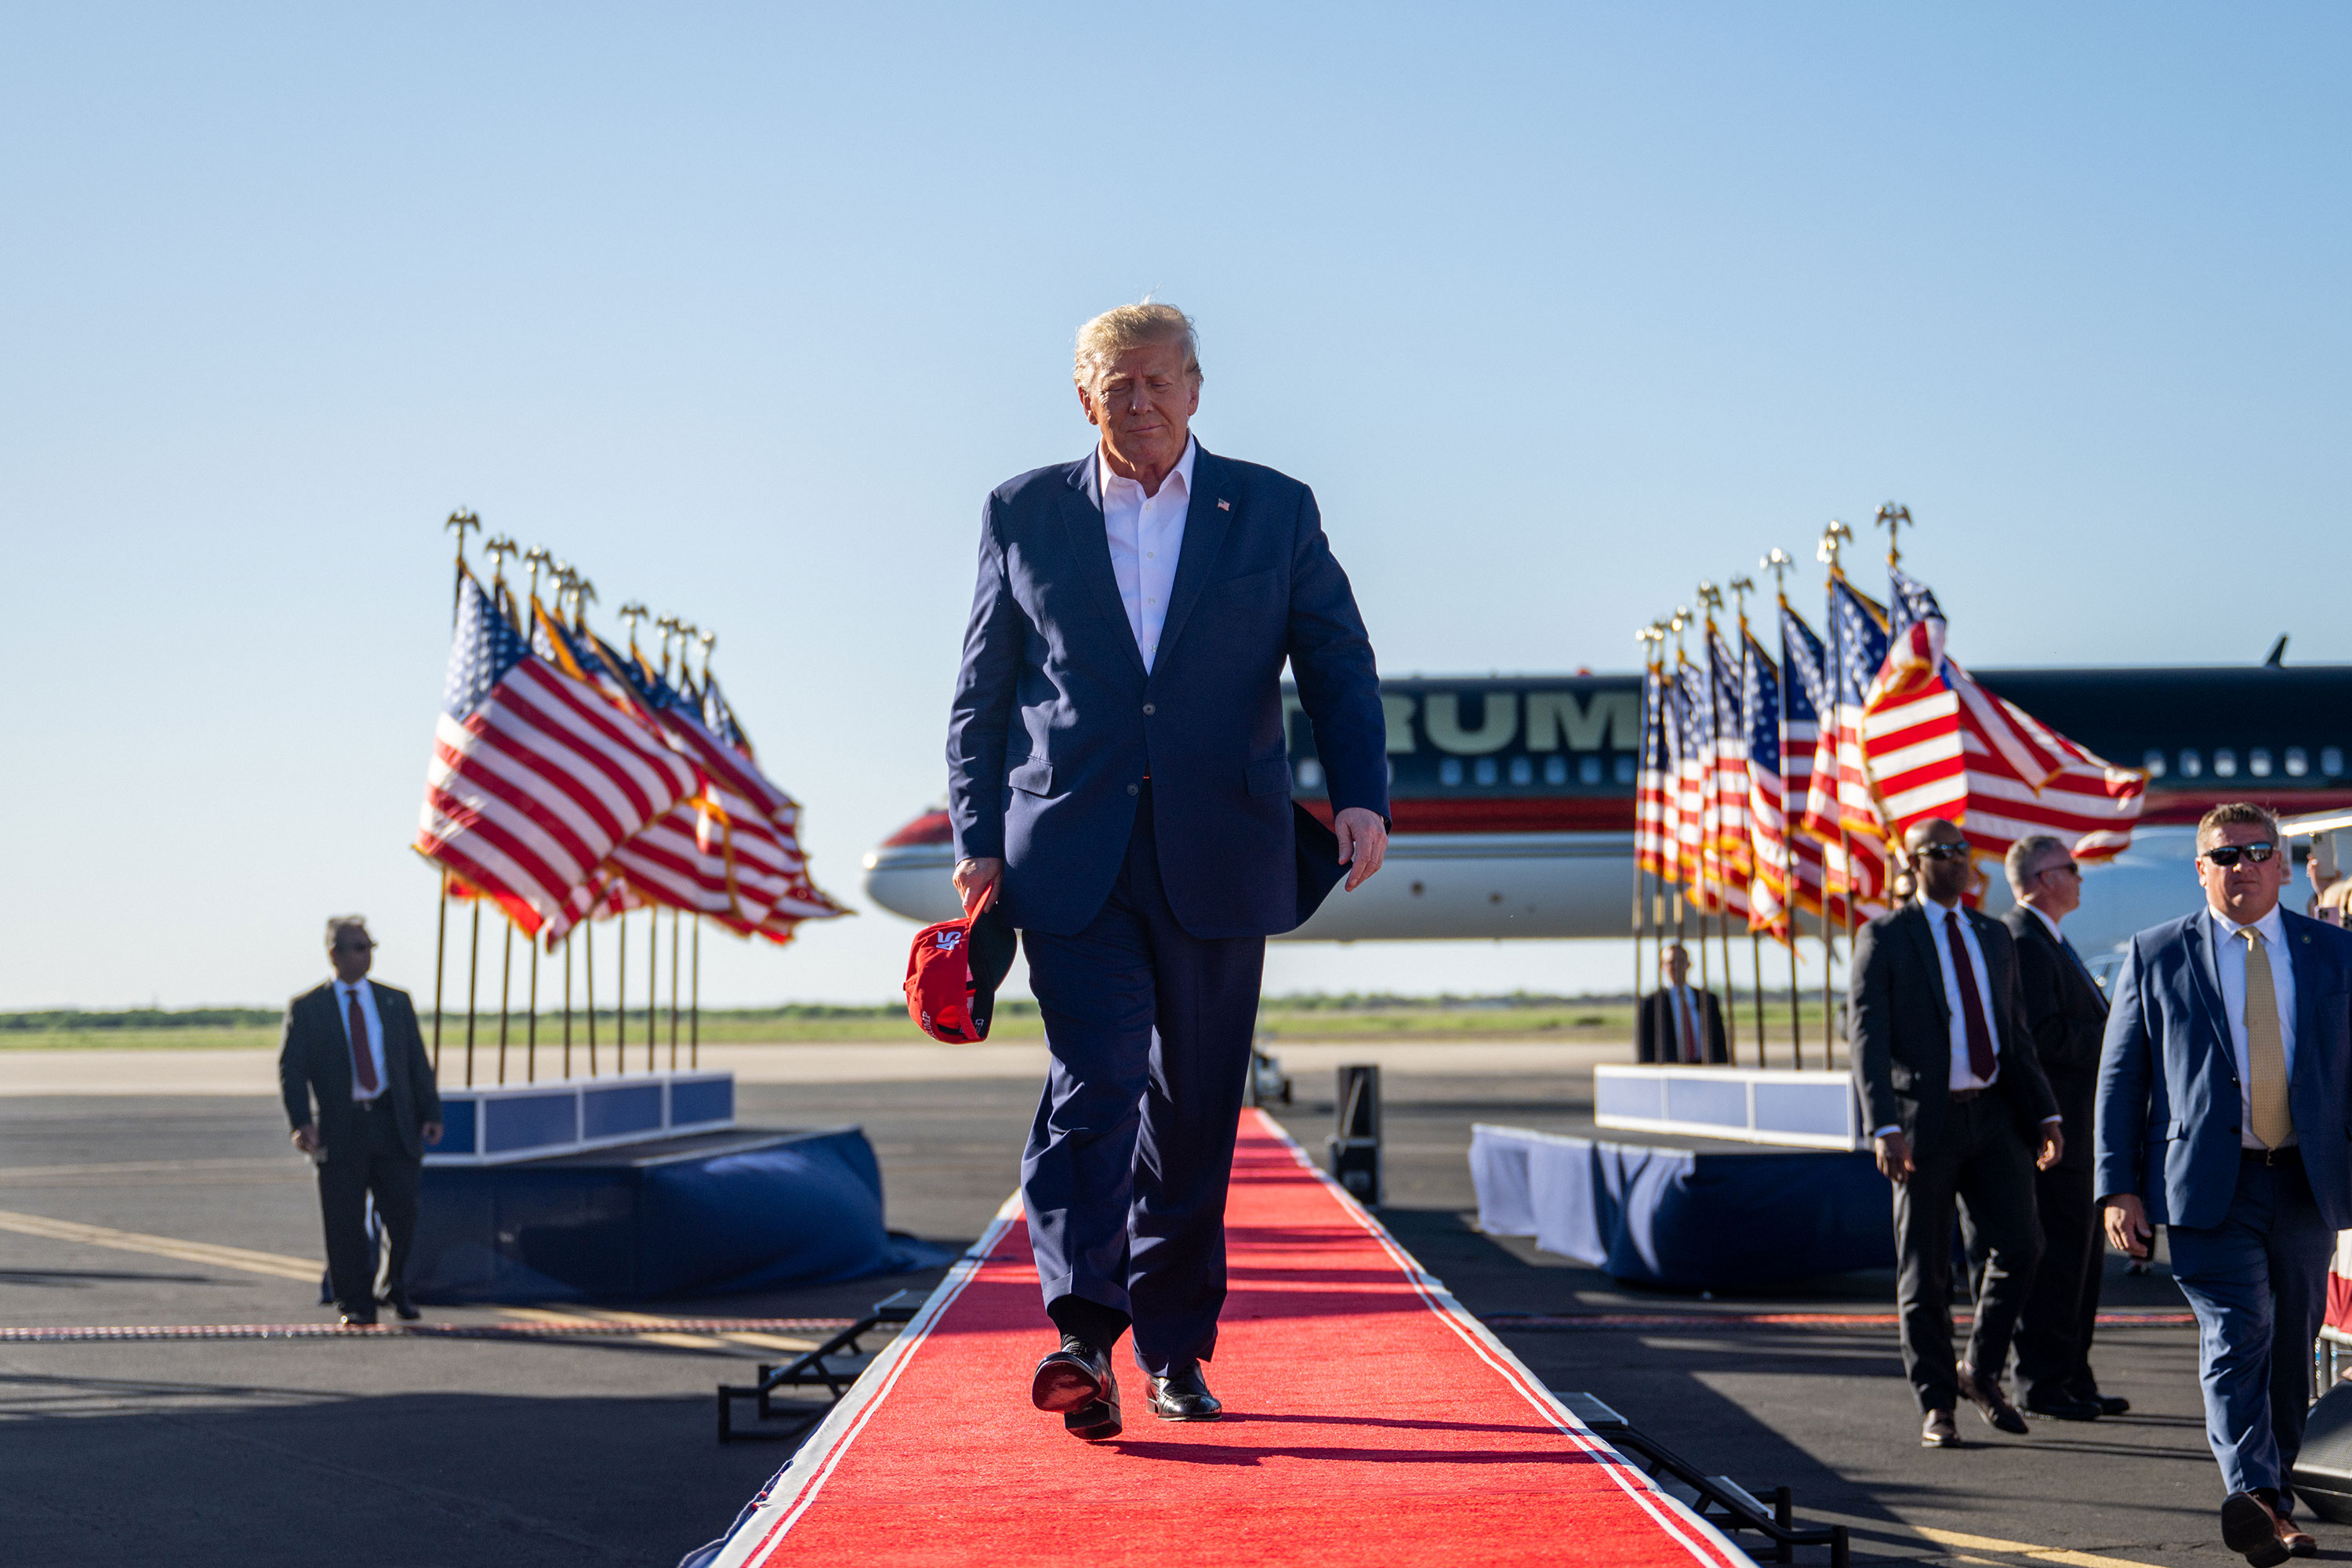 Former President Donald Trump arrives for a rally in Waco, Texas, on March 25.